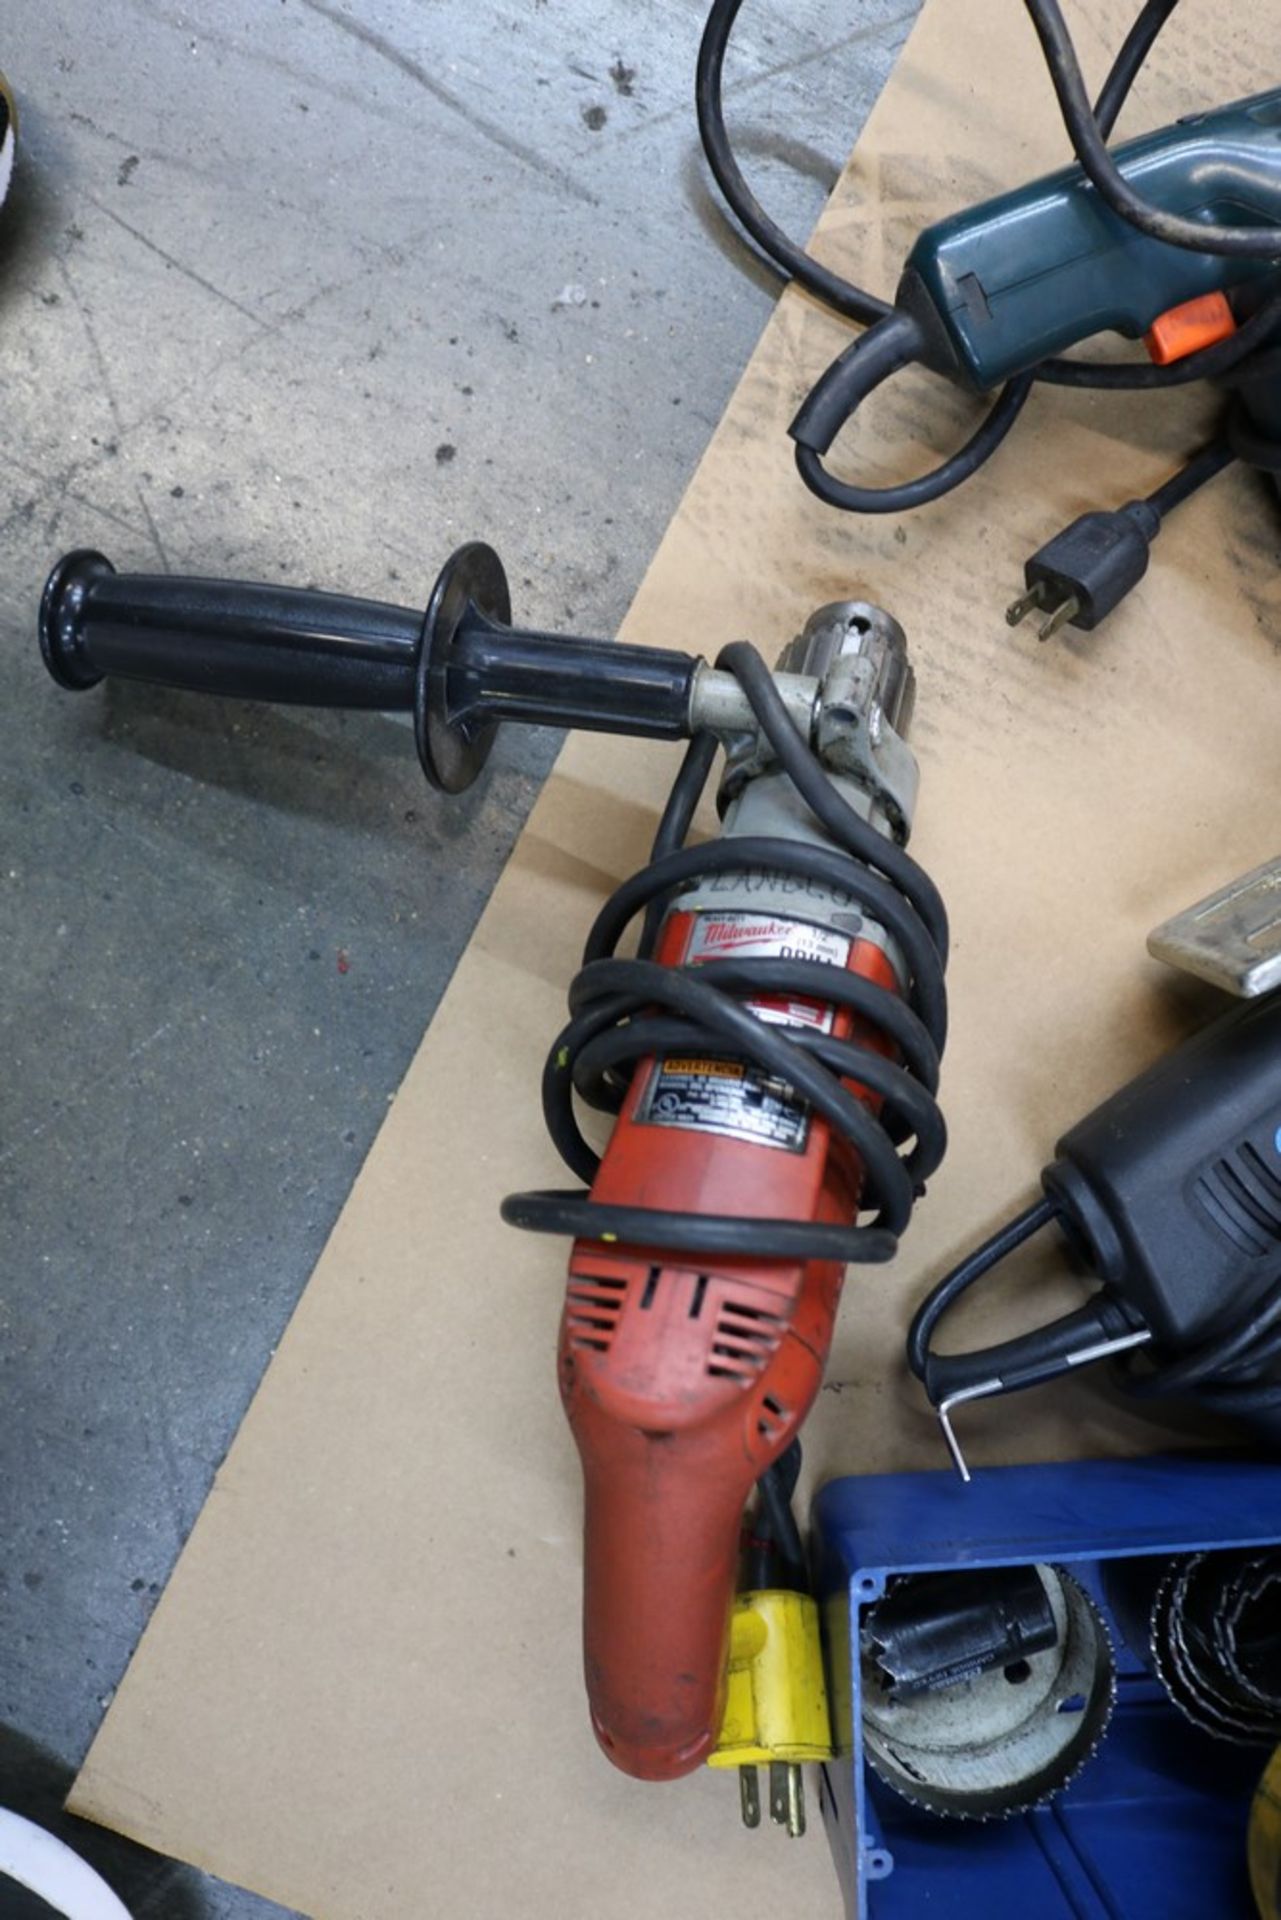 Power Glide Jig Saw, Black and Decker Electric Drill, Heavy Duty Milwaukee 1/2" Power Drill with - Image 4 of 5